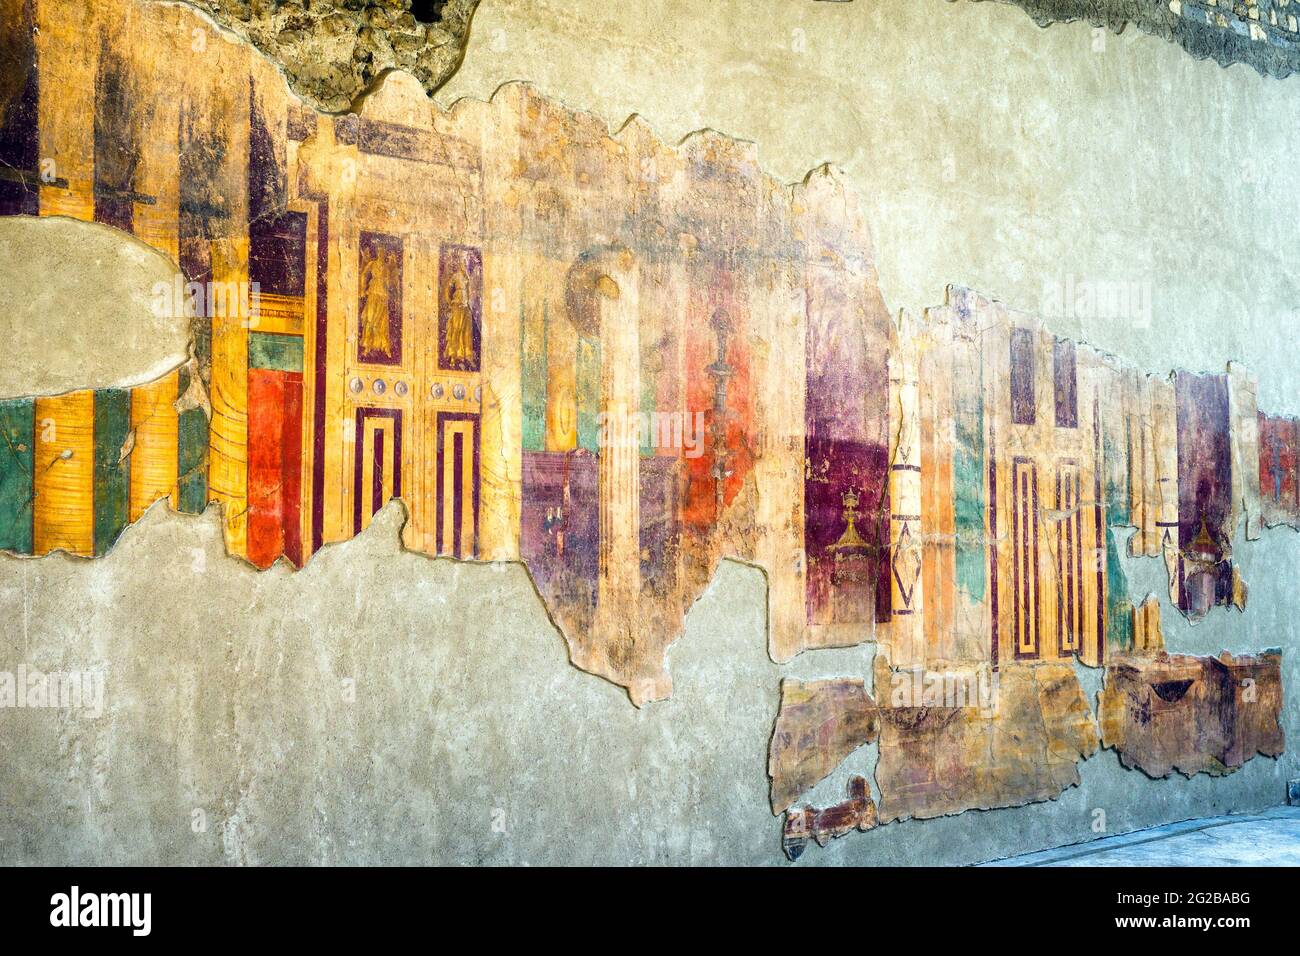 Second style fresco decorated wall - Oplontis known as Villa Poppaea in Torre Annunziata - Naples, Italy Stock Photo